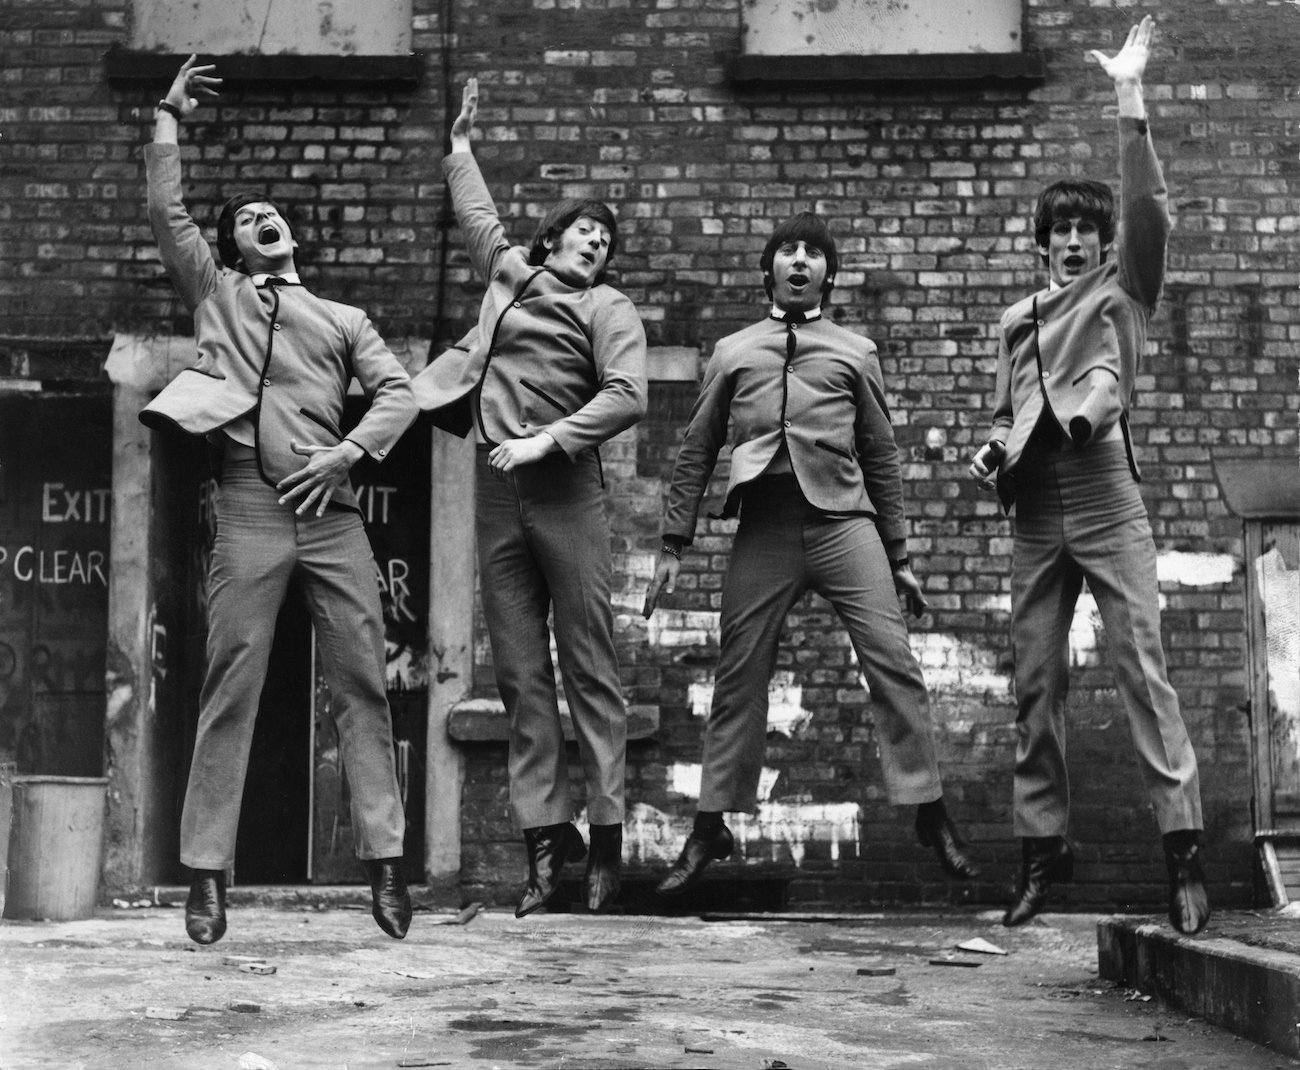 Actors in the 1974 musical, 'John, Paul, George, Ringo, and Bert' jumping in the air wearing Beatle suits.